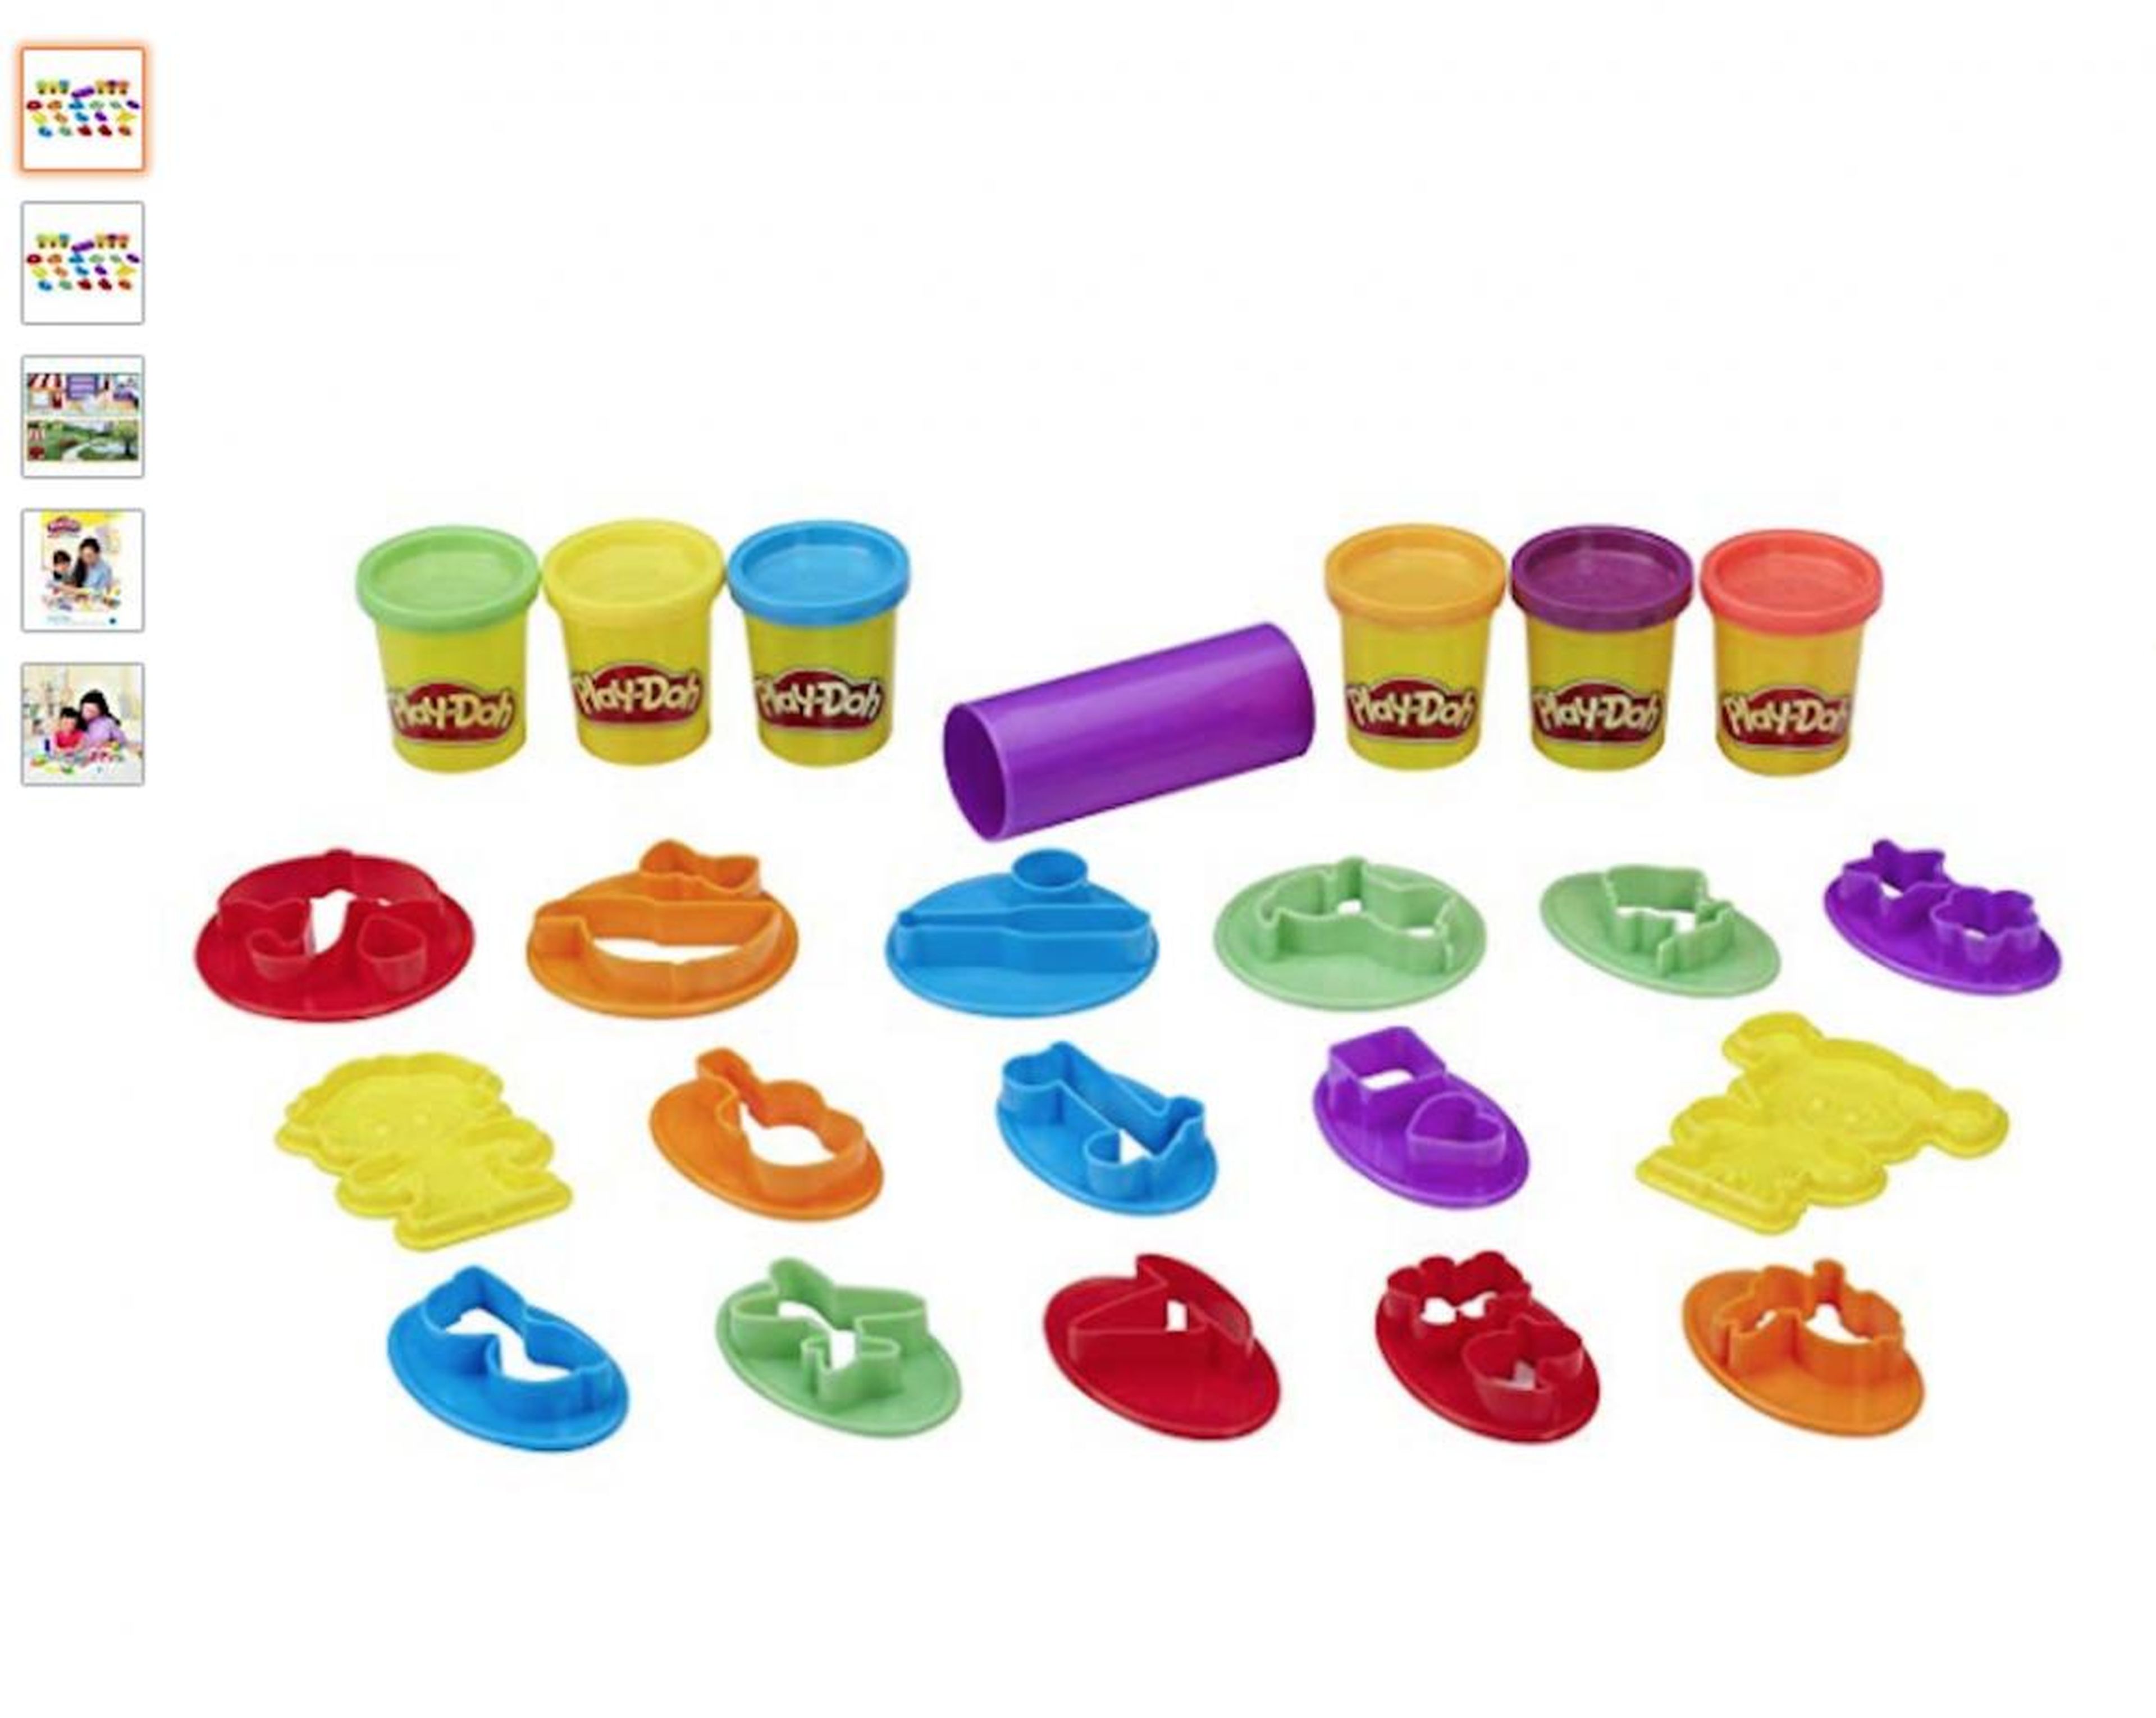 <a href="https://amzn.to/2zW2yuu">Play-Doh Shape and Learn Shape a Story</a> was flying off the shelves, and shoppers were stocking up on Kleenex Ultra Soft Toilet Tissue.